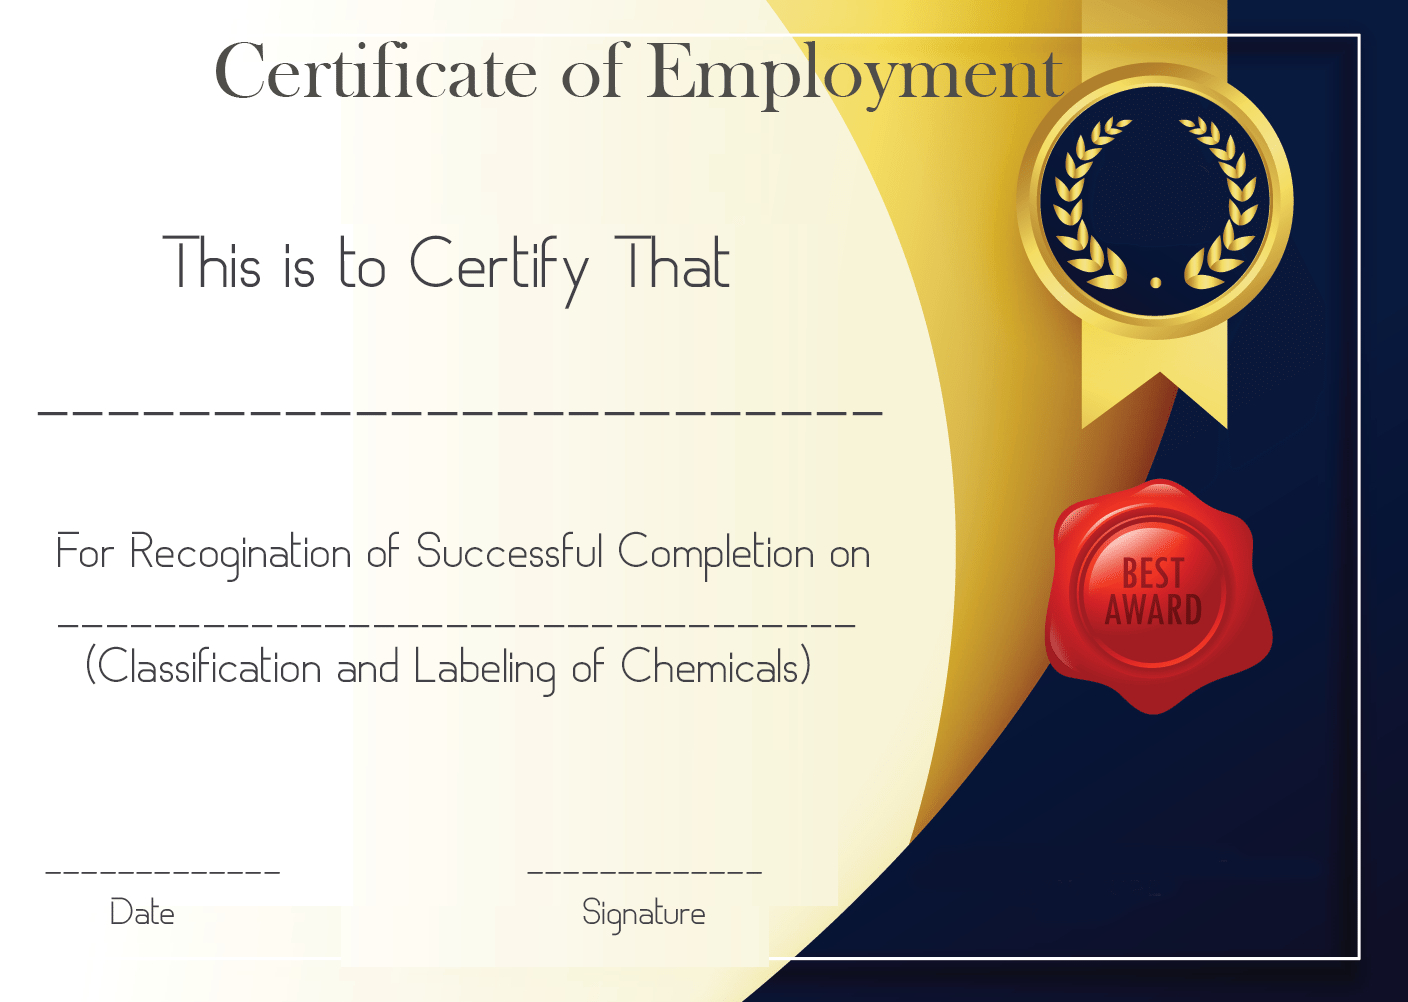 Free Sample Certificate Of Employment Template | Certificate For Sample Certificate Employment Template